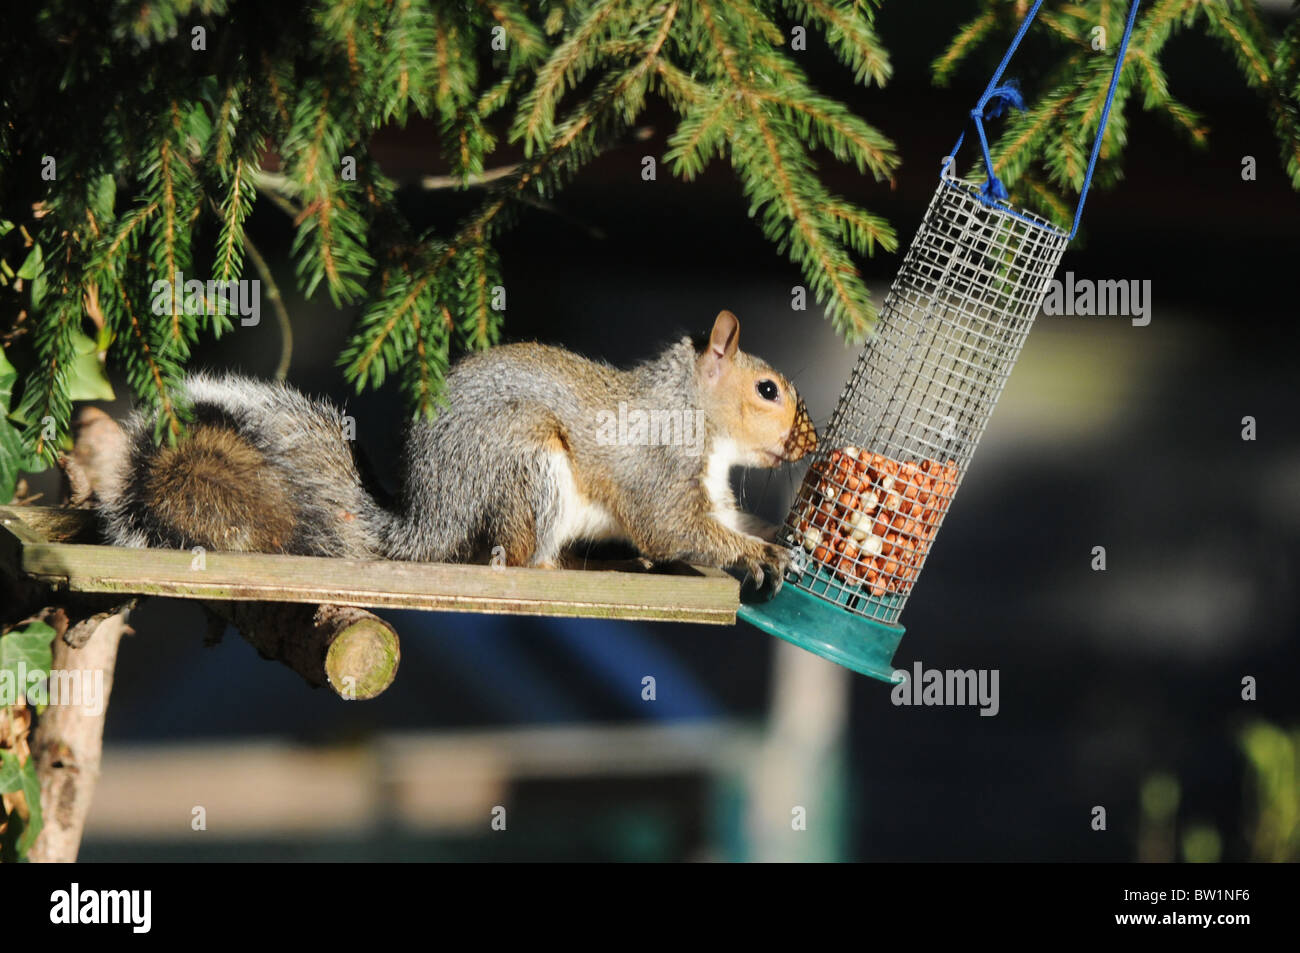 Grey Squirrel eating nuts from a bird feeder using its hands to pull the feeder closer. Stock Photo